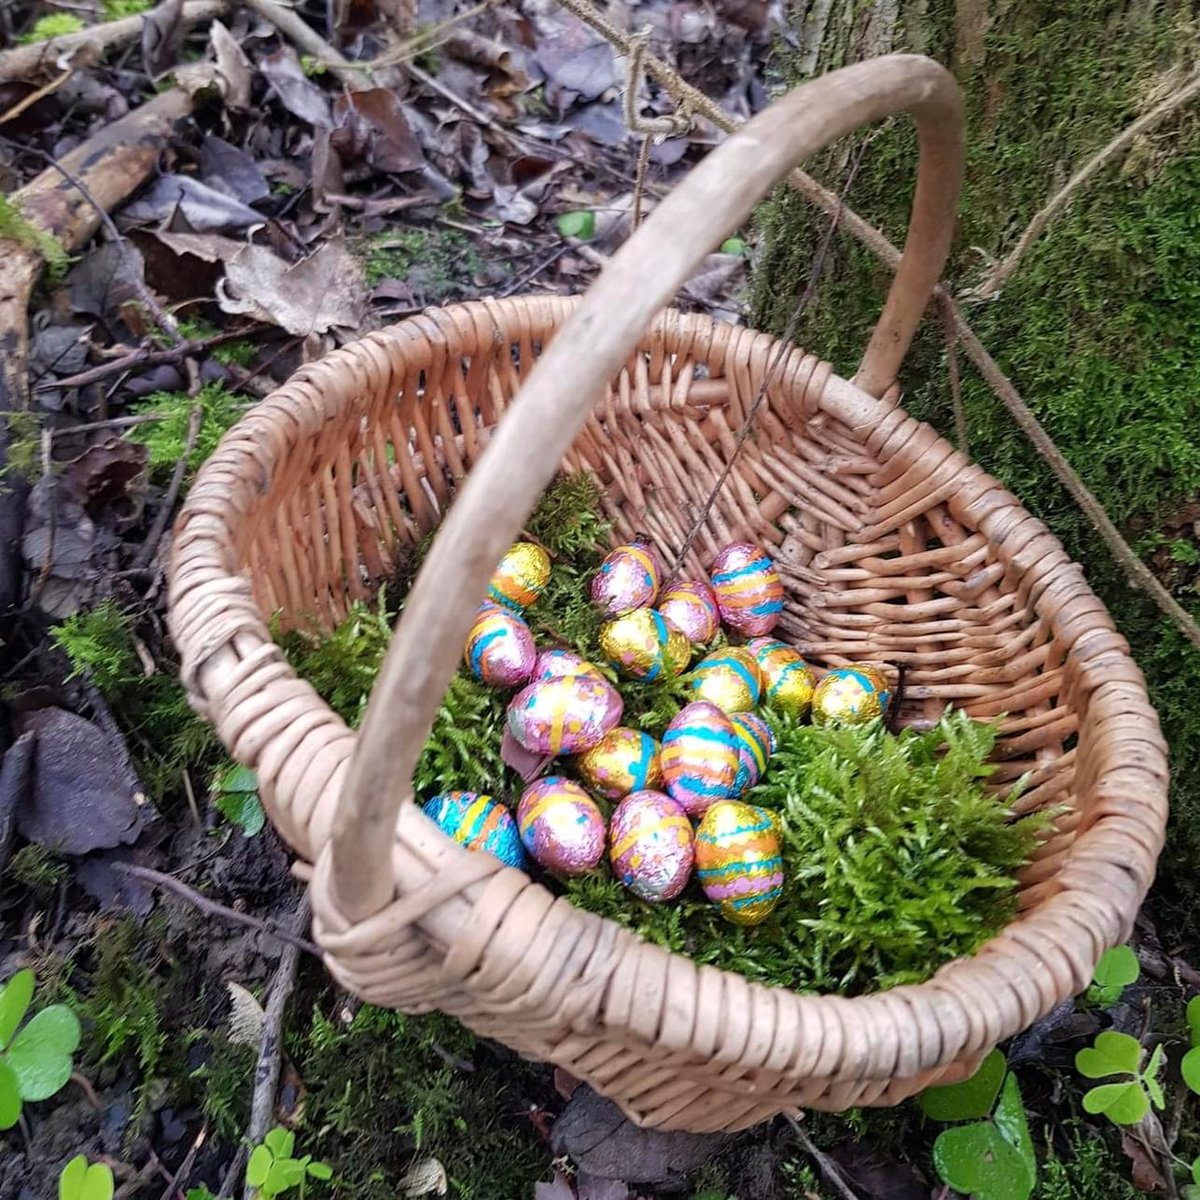 Join us this Easter at Swinton Bivouac! Enjoy miles of walking trails, bike tracks, and other outdoor activities, from bug hunting to geocaching, or explore the Druid’s Temple; there's plenty to do in the fresh air. For more information, visit: ow.ly/pZ8T50R0lbu